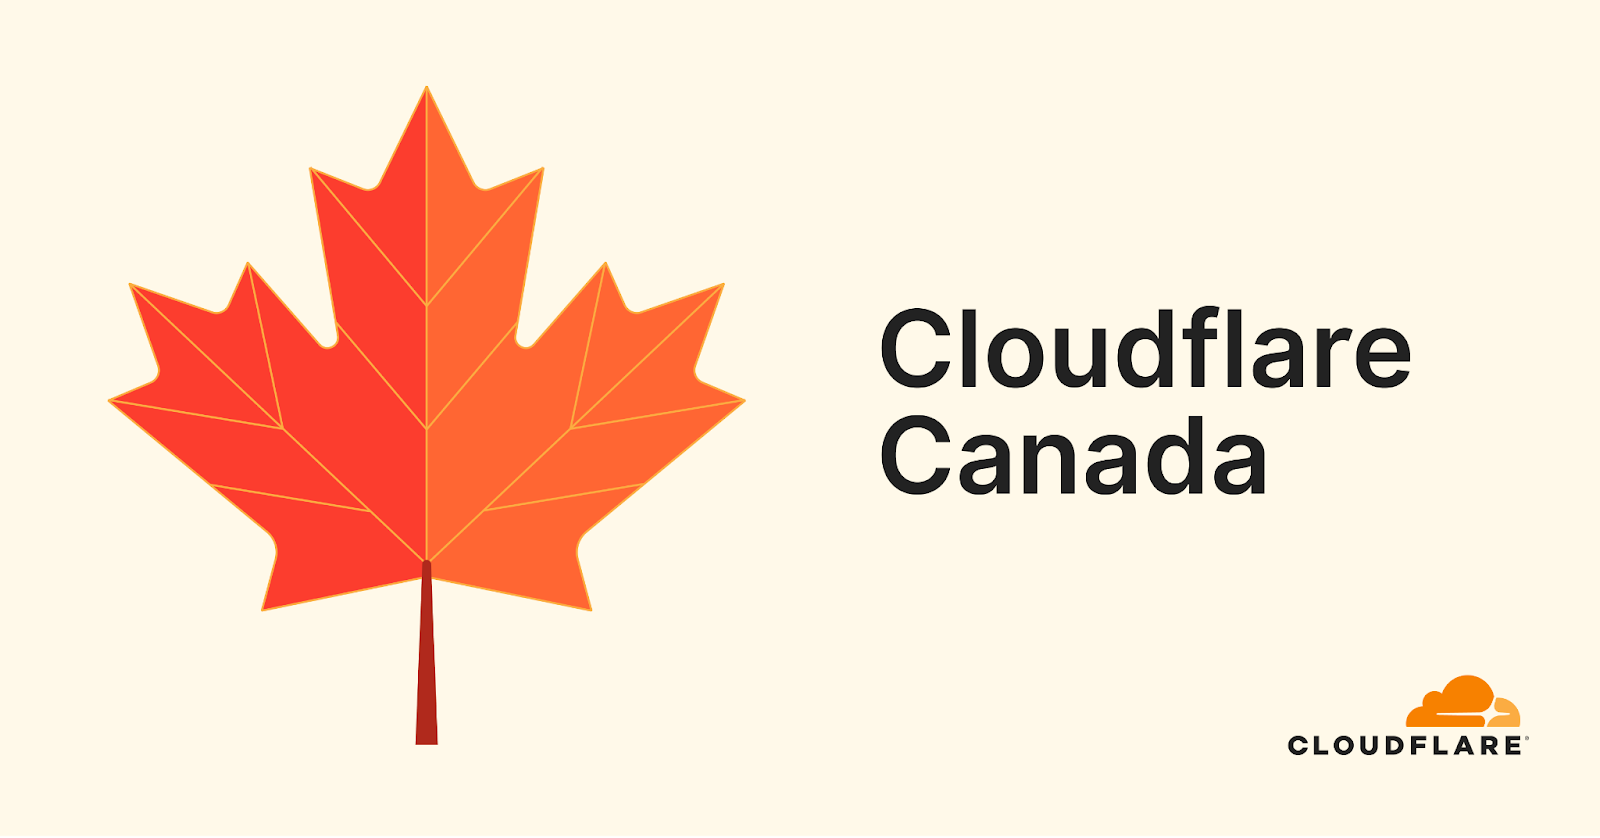 Why I'm helping Cloudflare grow in Canada